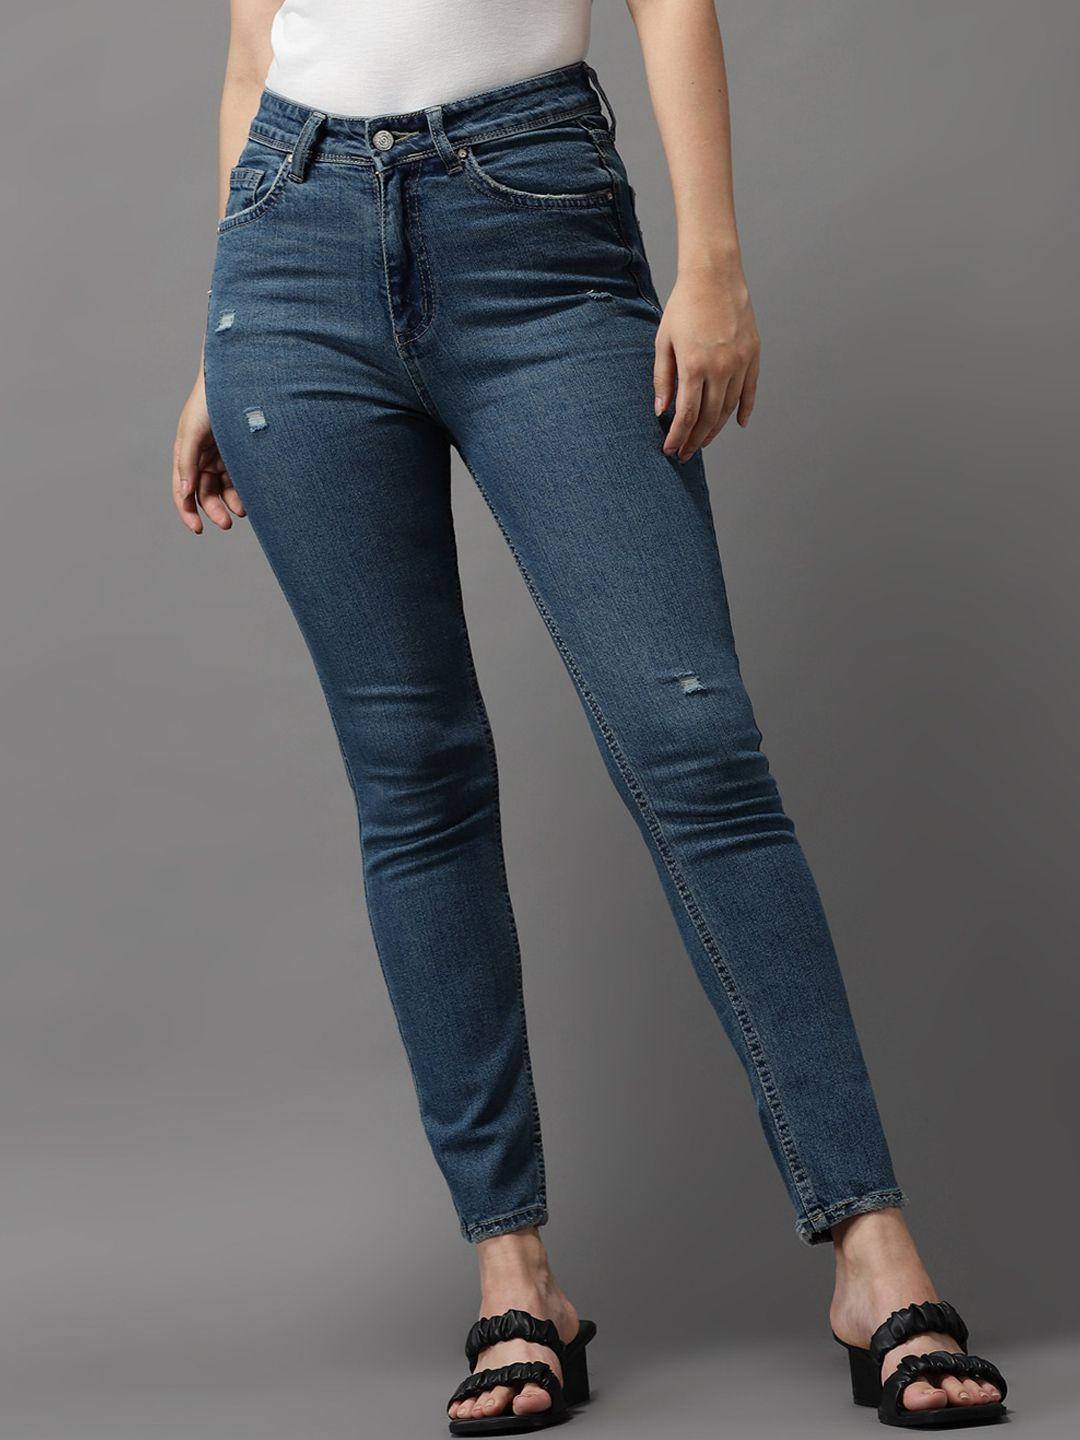 showoff-women-blue-jean-slim-fit-high-rise-light-fade-stretchable-jeans